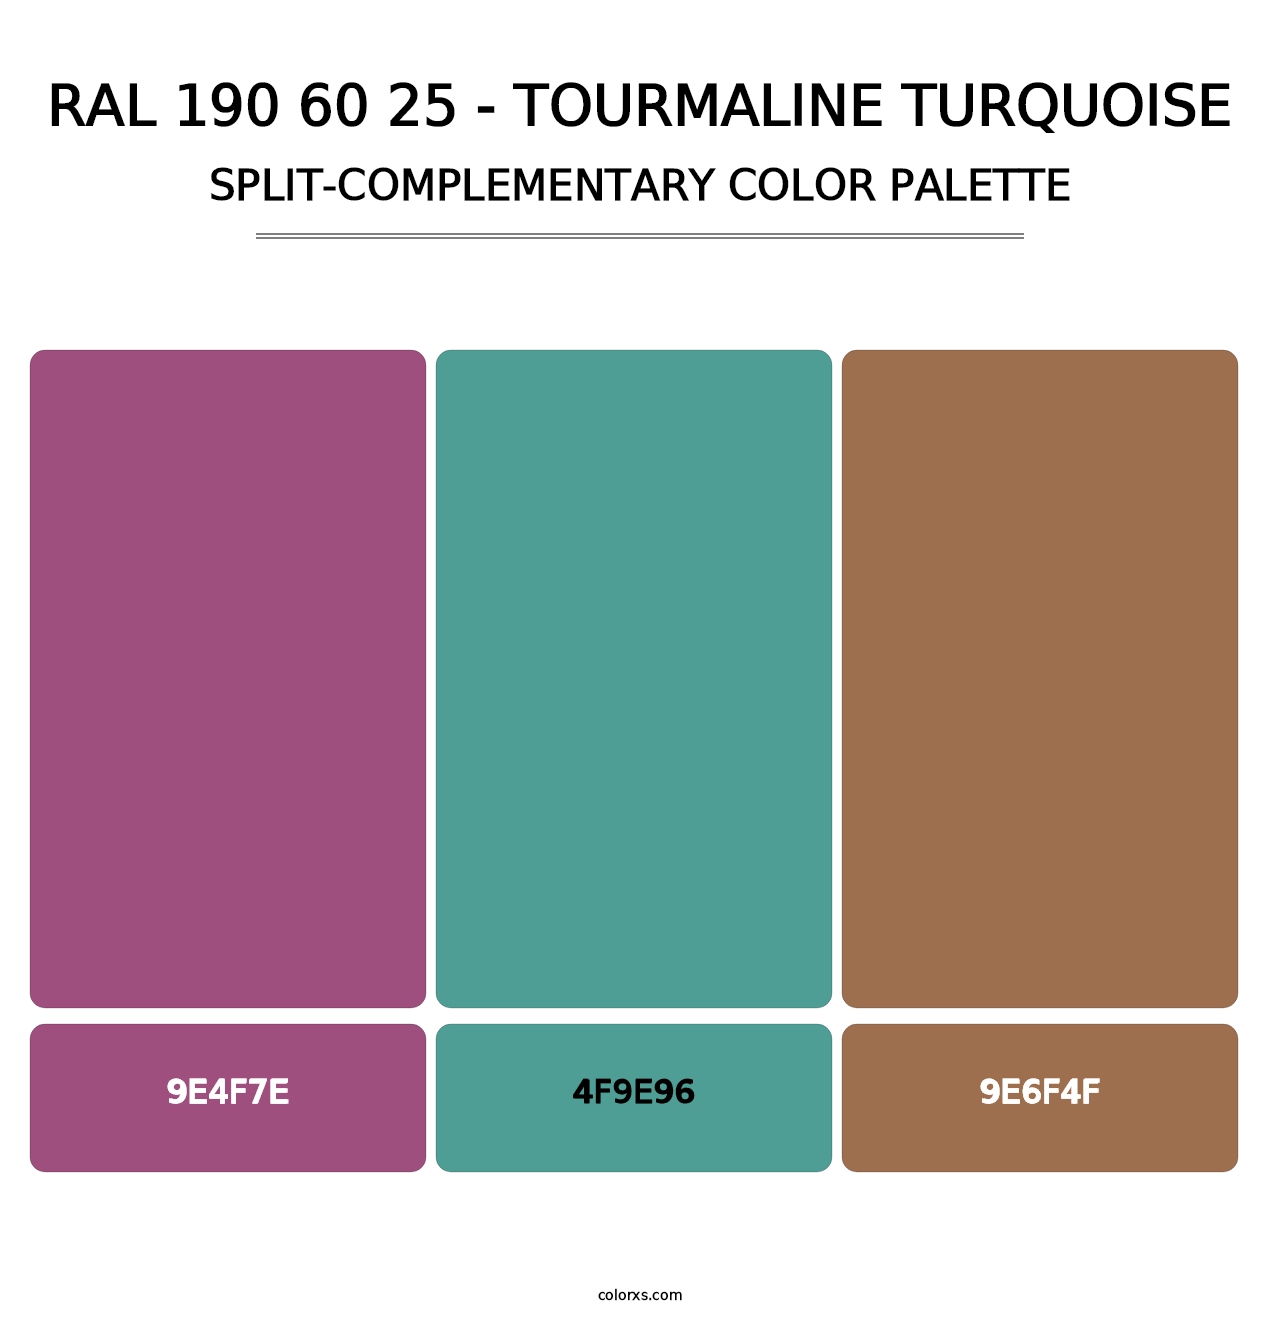 RAL 190 60 25 - Tourmaline Turquoise - Split-Complementary Color Palette